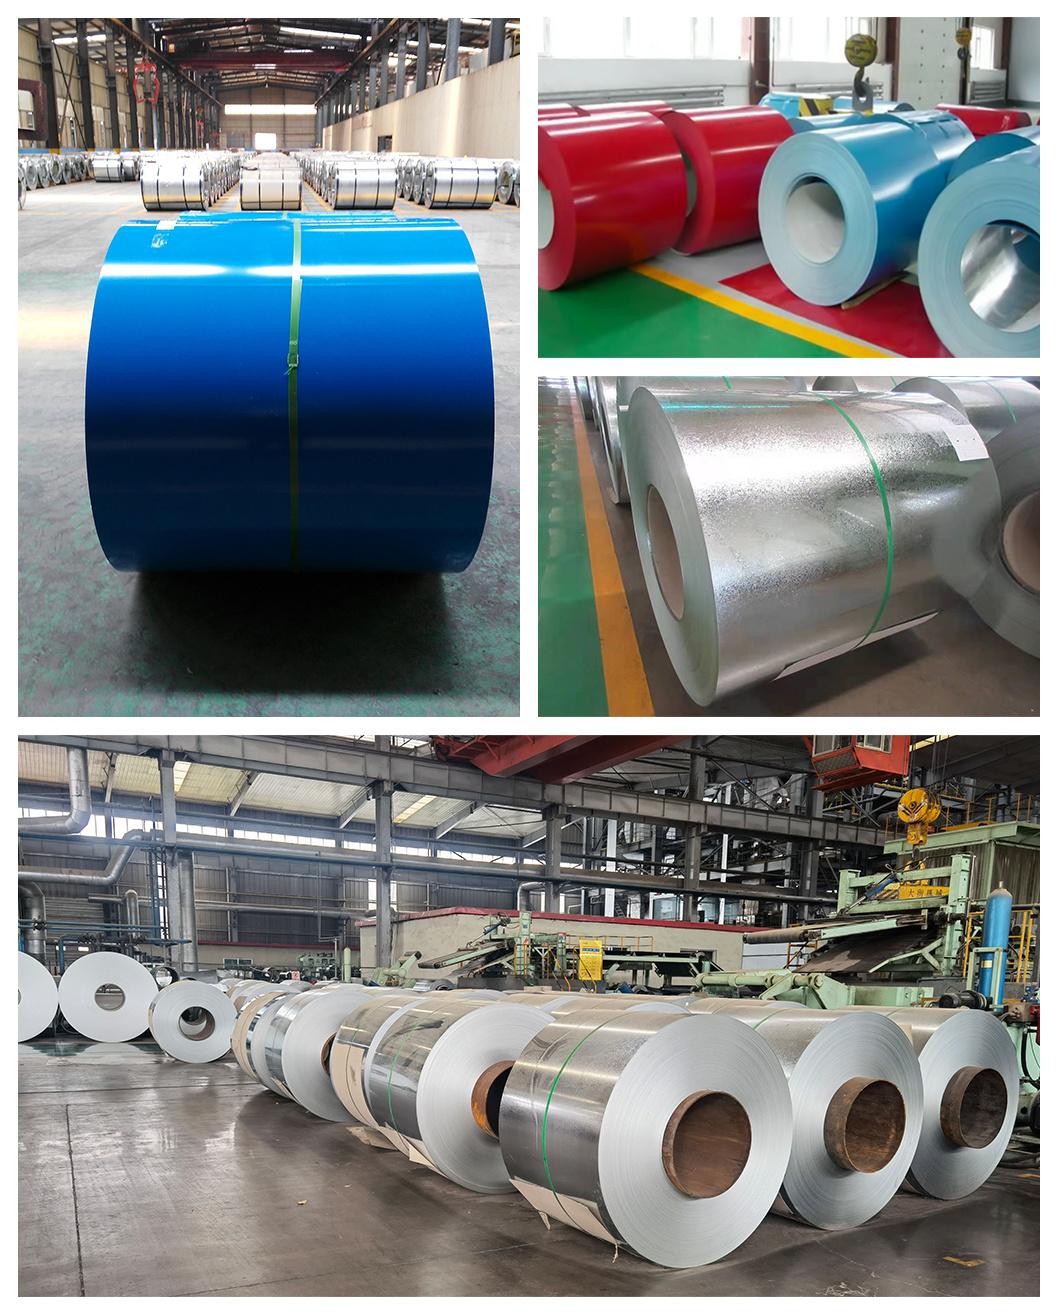 Dx51d 120g Zinc Coated Gi Galvanized Steel Coil SPCC Galvanised Coil Supplier for Roofing Building Material